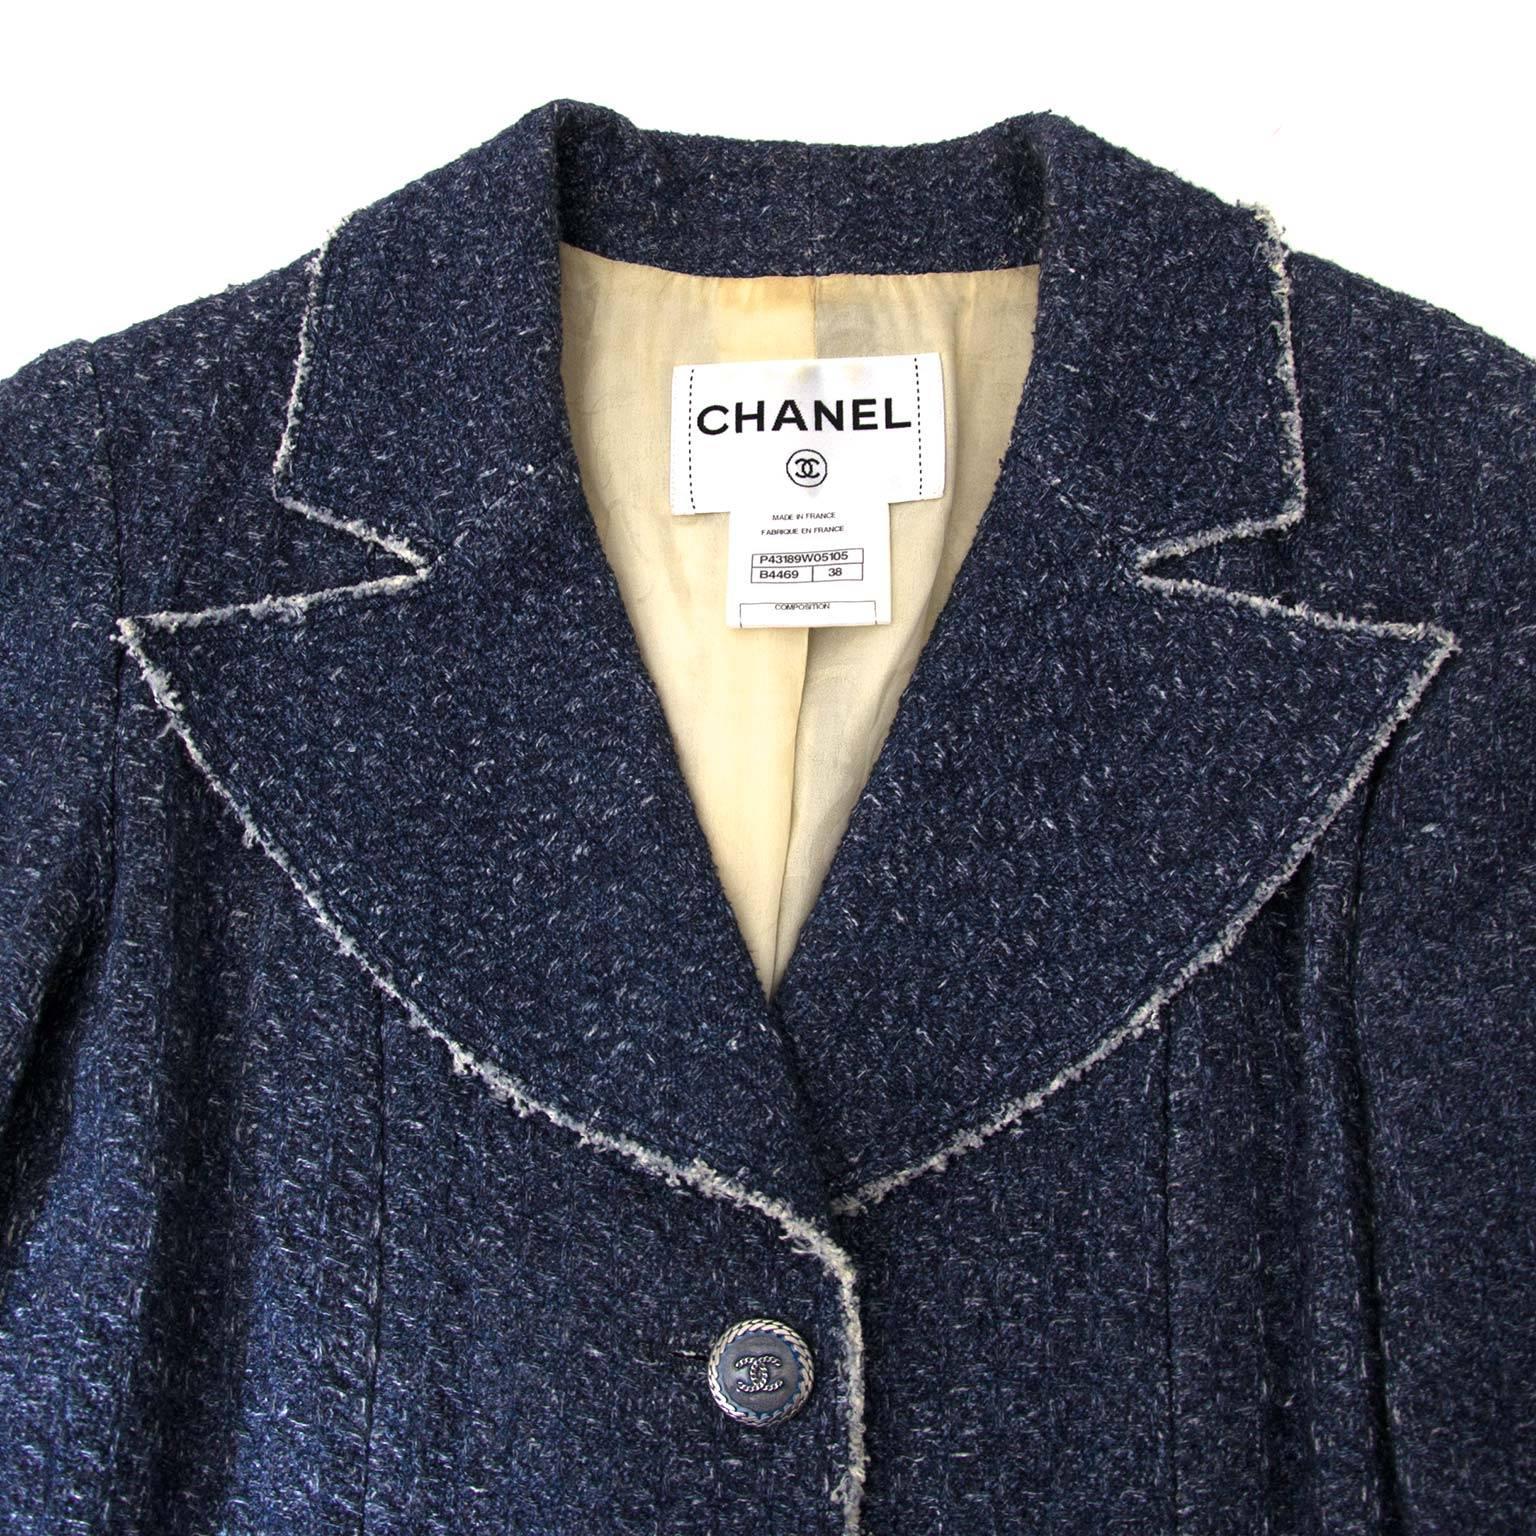 Very Good Preloved Condition

Estimated Retail Price: € 2000,-

Chanel Blue Fantasy Tweed Jacket - Size 38

Chanel tweed jackets are absolutely timeless and will never go out of style.
This piece has 1/2 sleeves and matching blue button with the